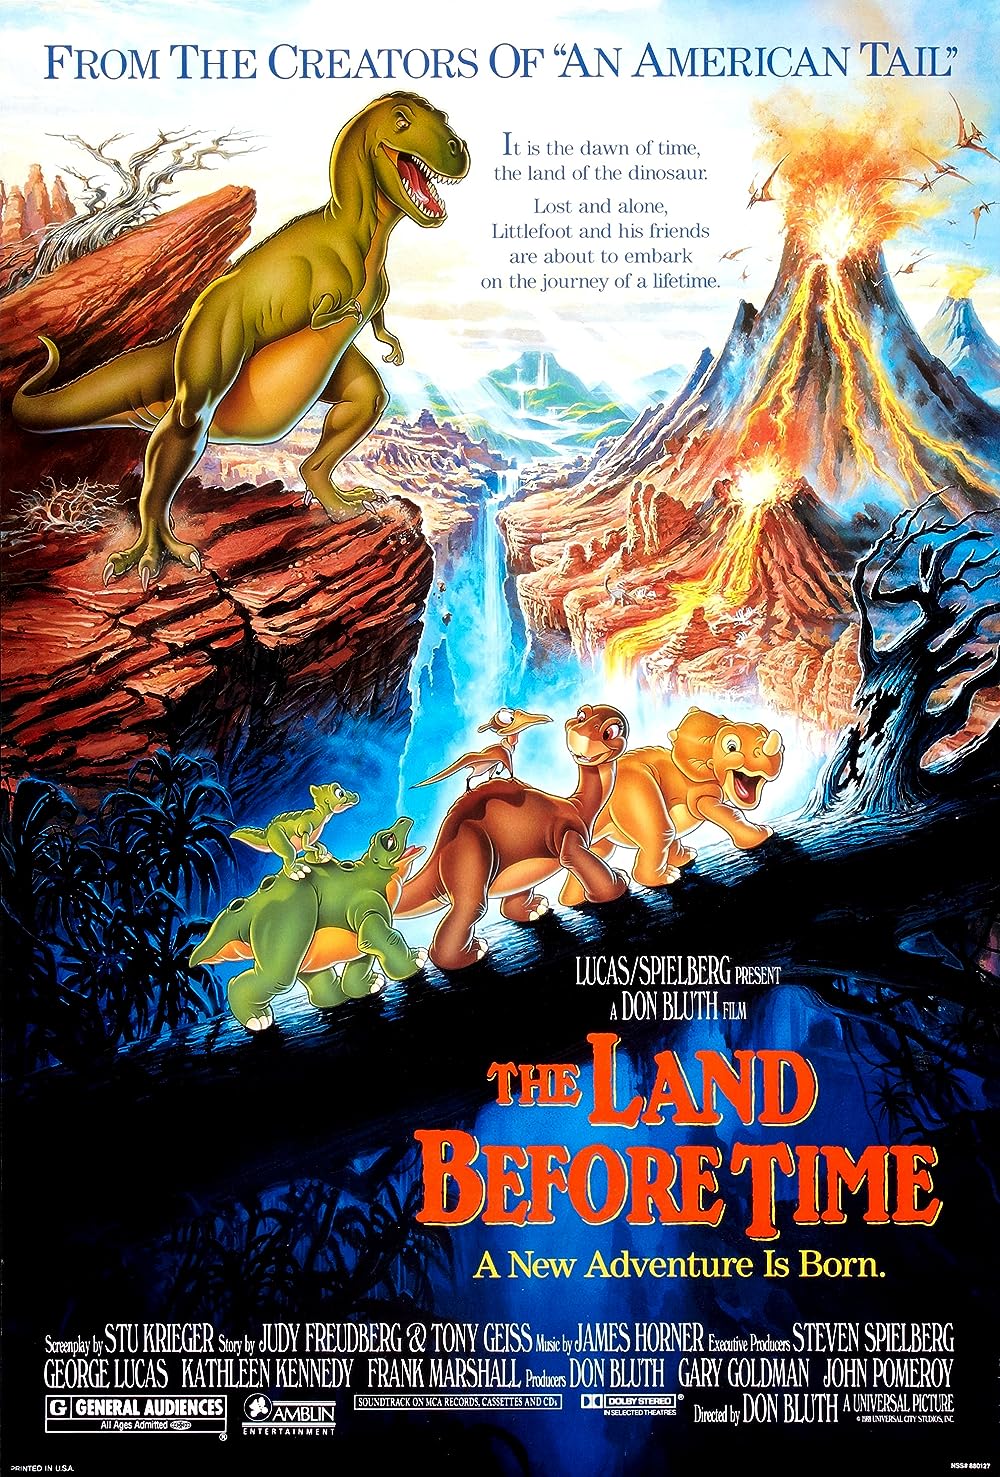 Poster from the movie The Land Before Time featuring dinosaurs